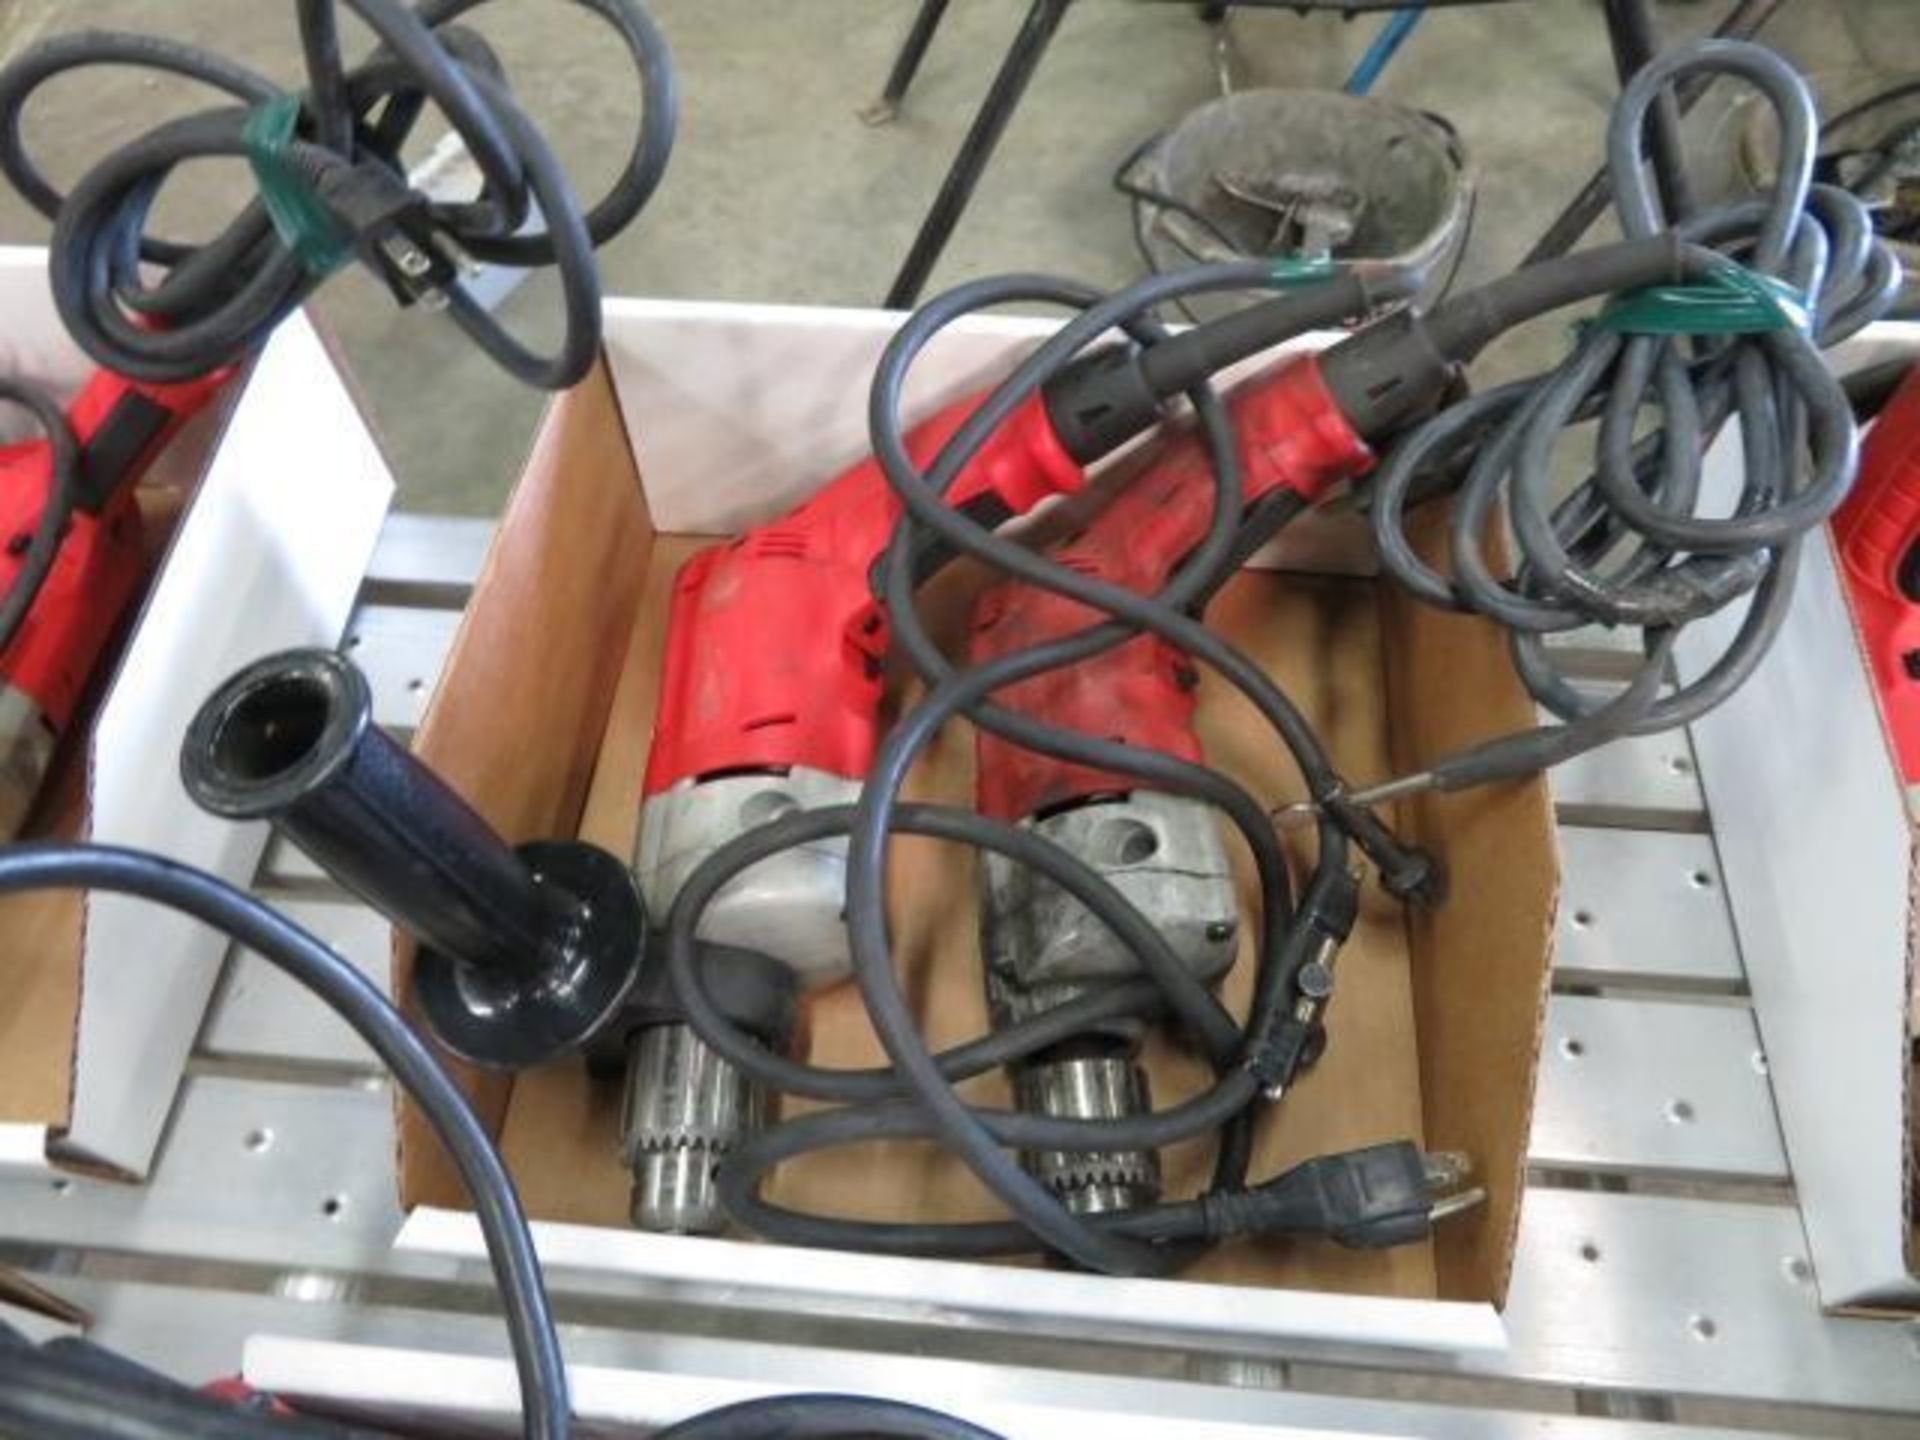 LOT: (2) Milwaukee 1/2 in. Electric Drills